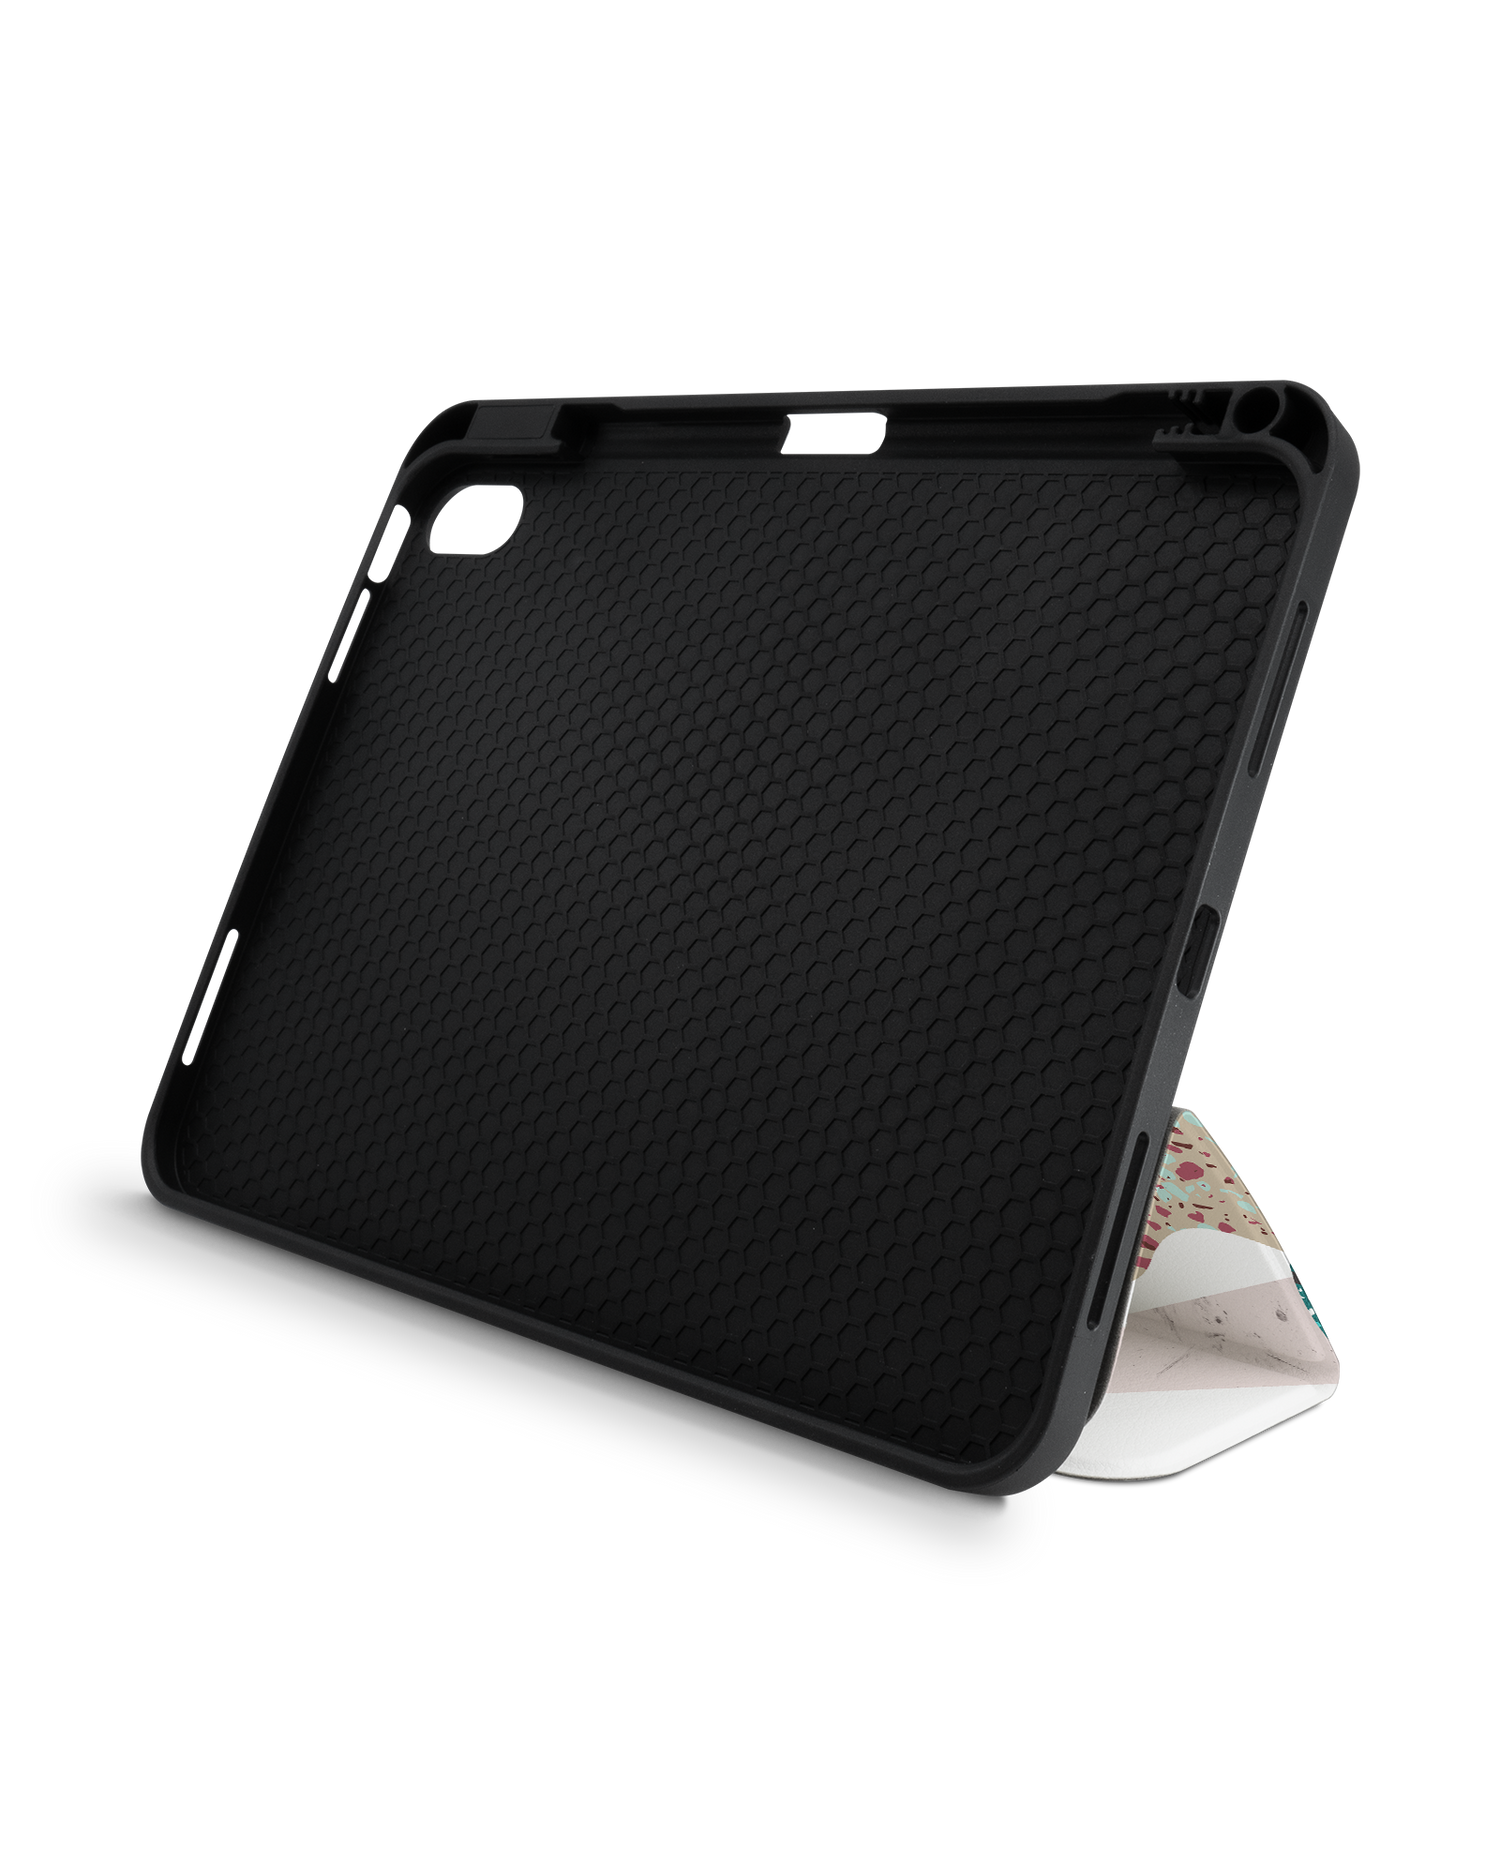 Scattered Shapes iPad Case with Pencil Holder for Apple iPad (10th Generation): Set up in landscape format (front view)